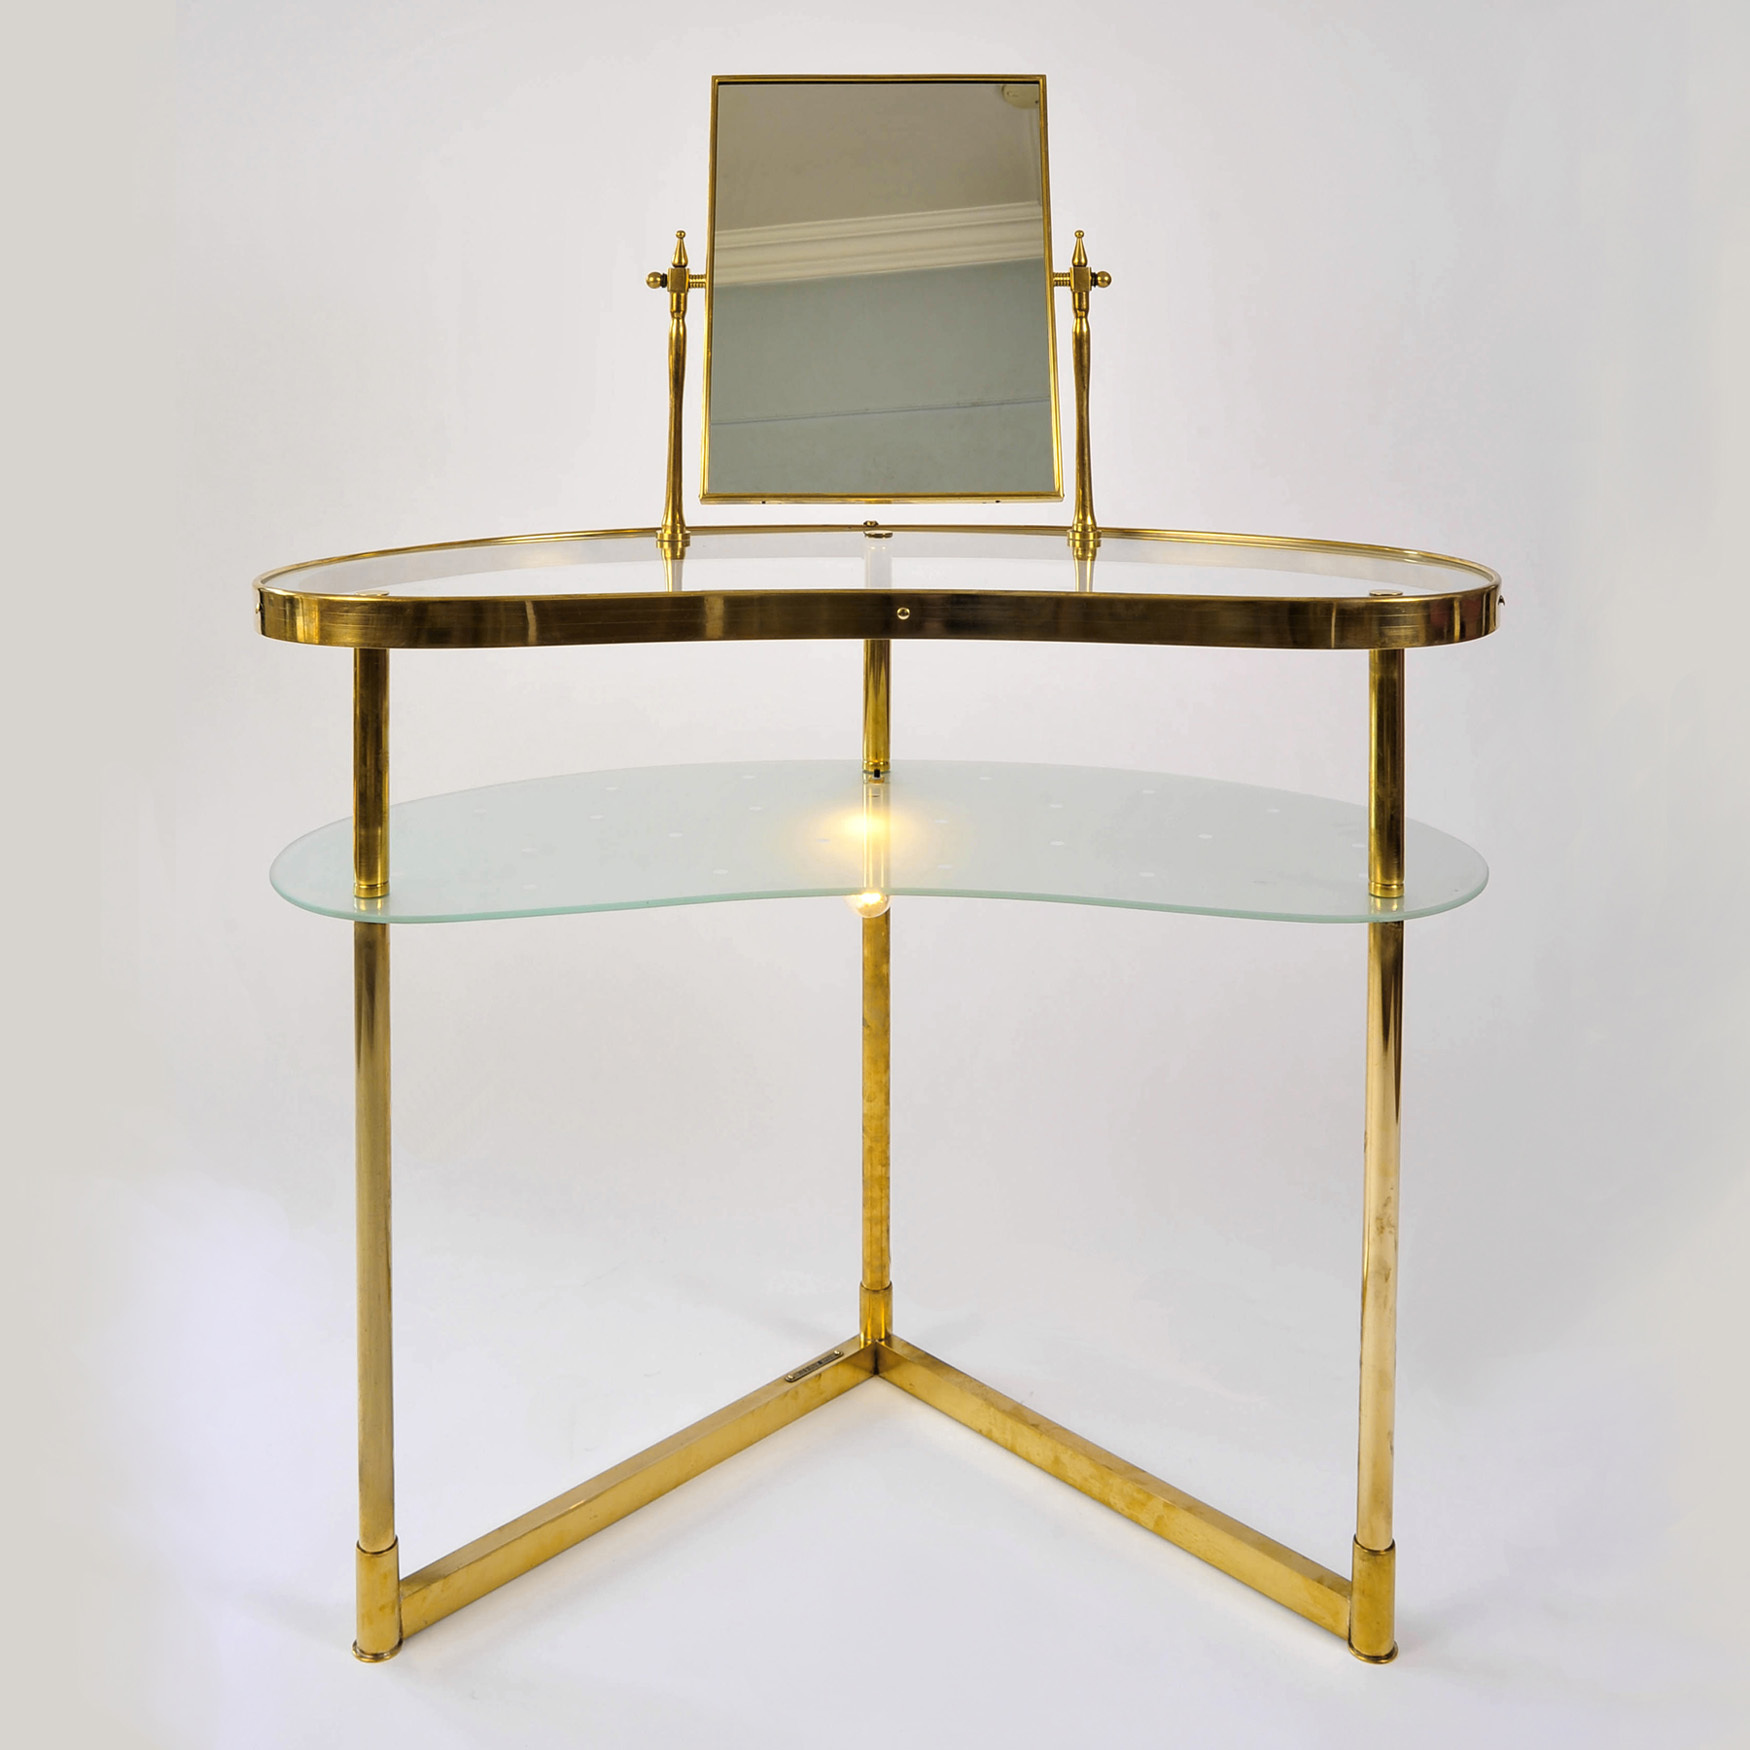 The image for Brass Dressing Table Main Image